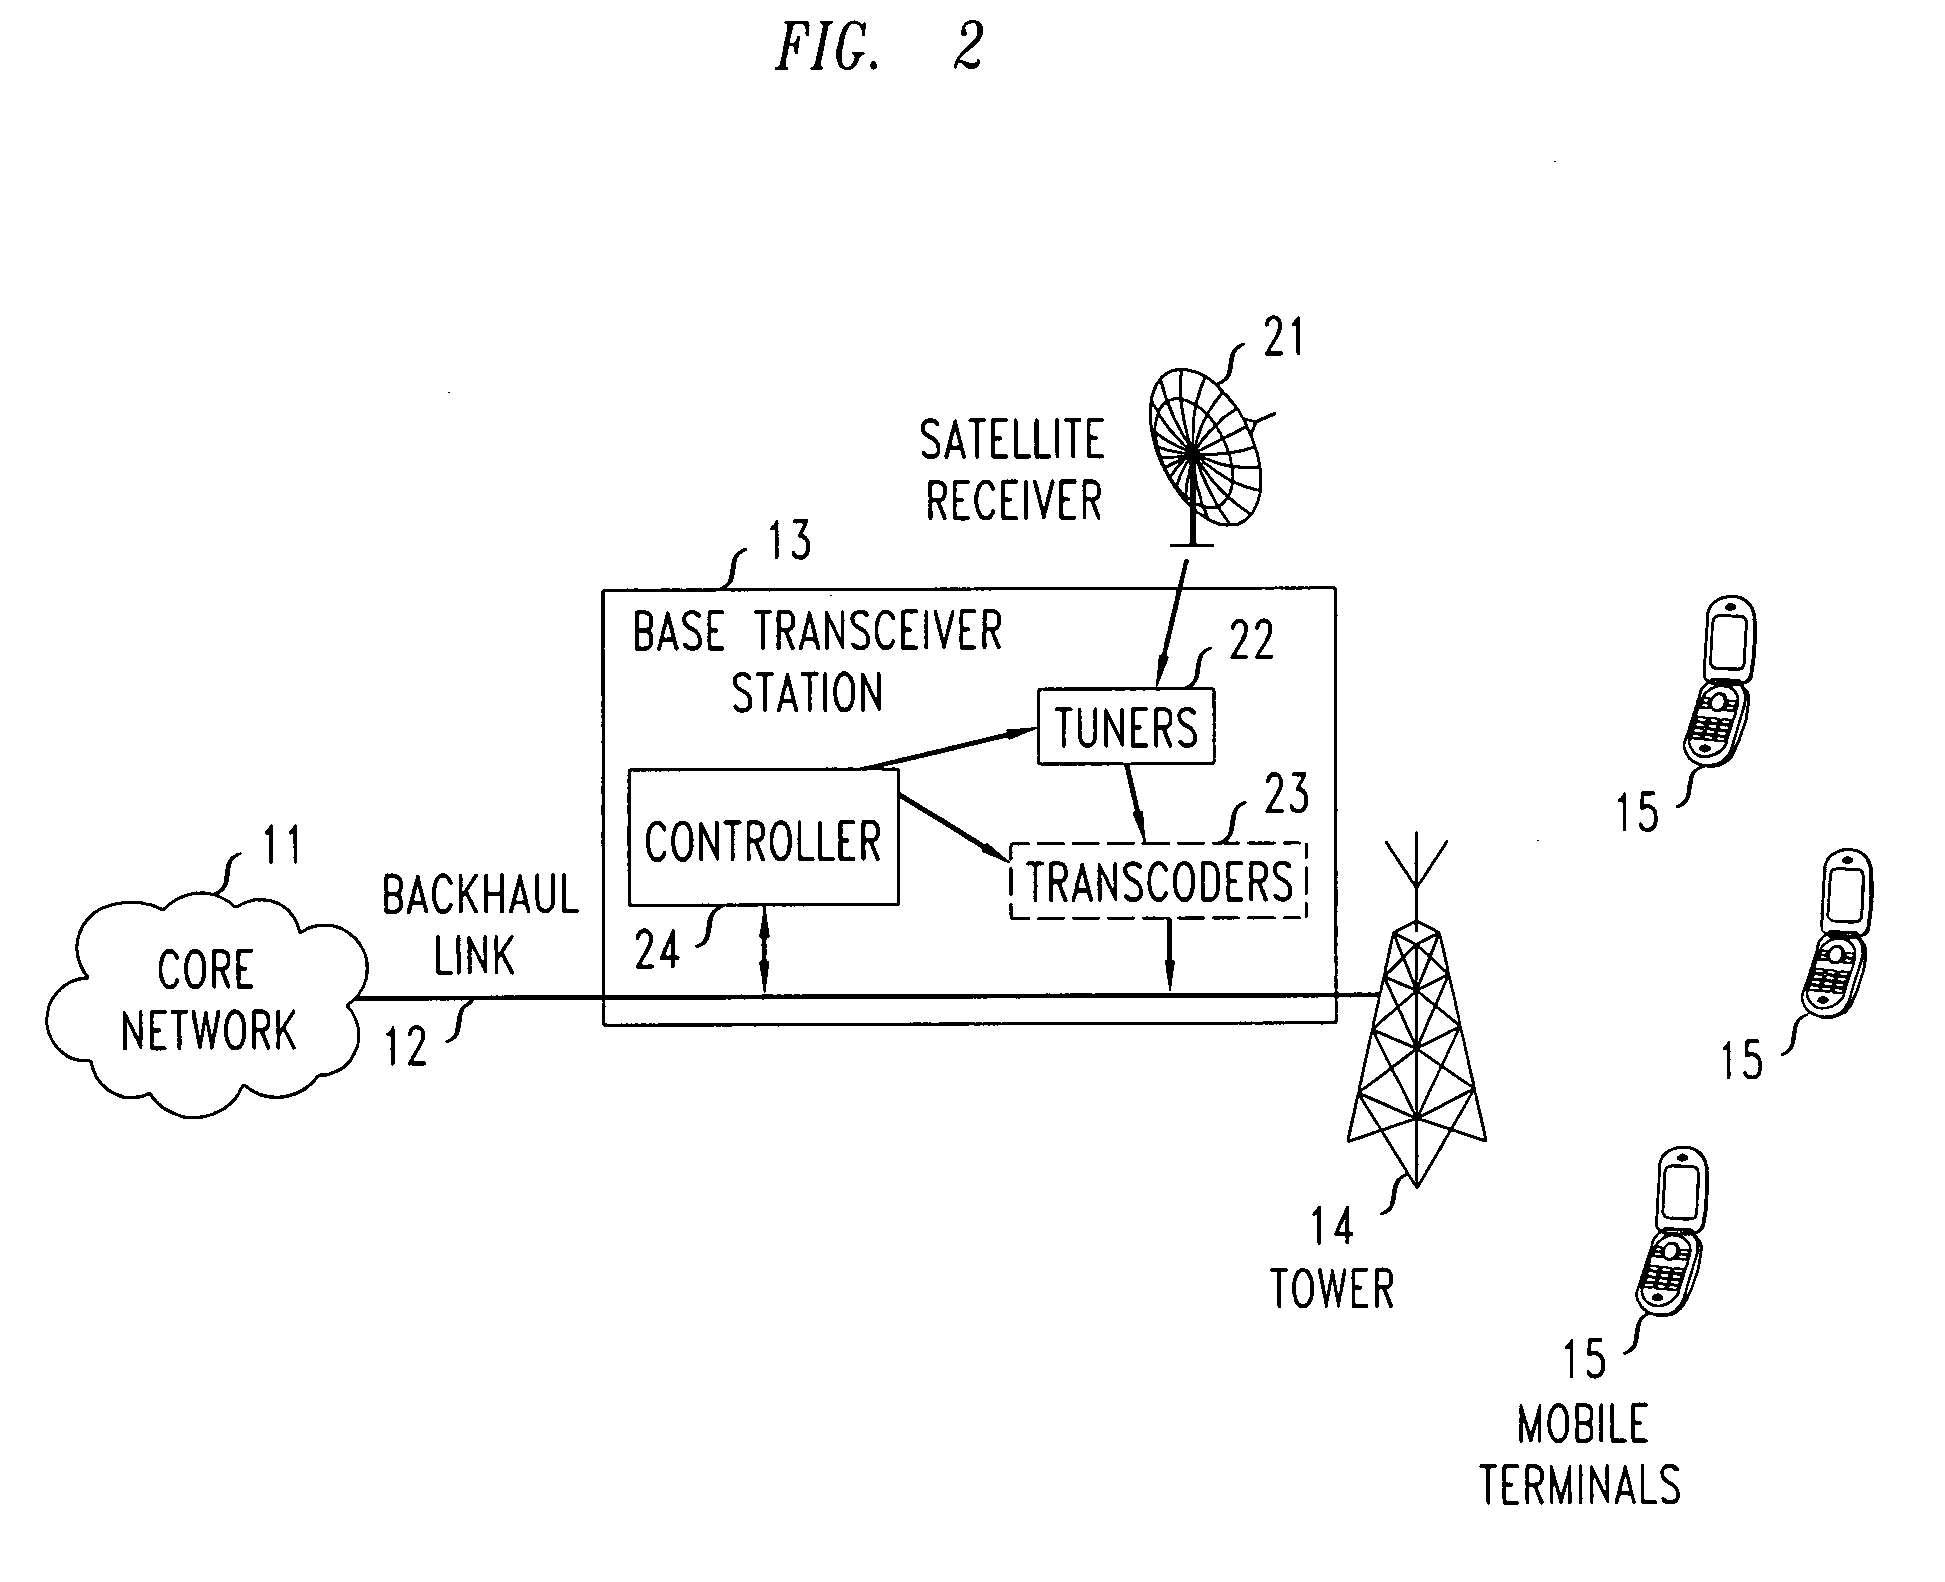 Method and apparatus for providing local multimedia content at a mobile wireless base station using a satellite receiver